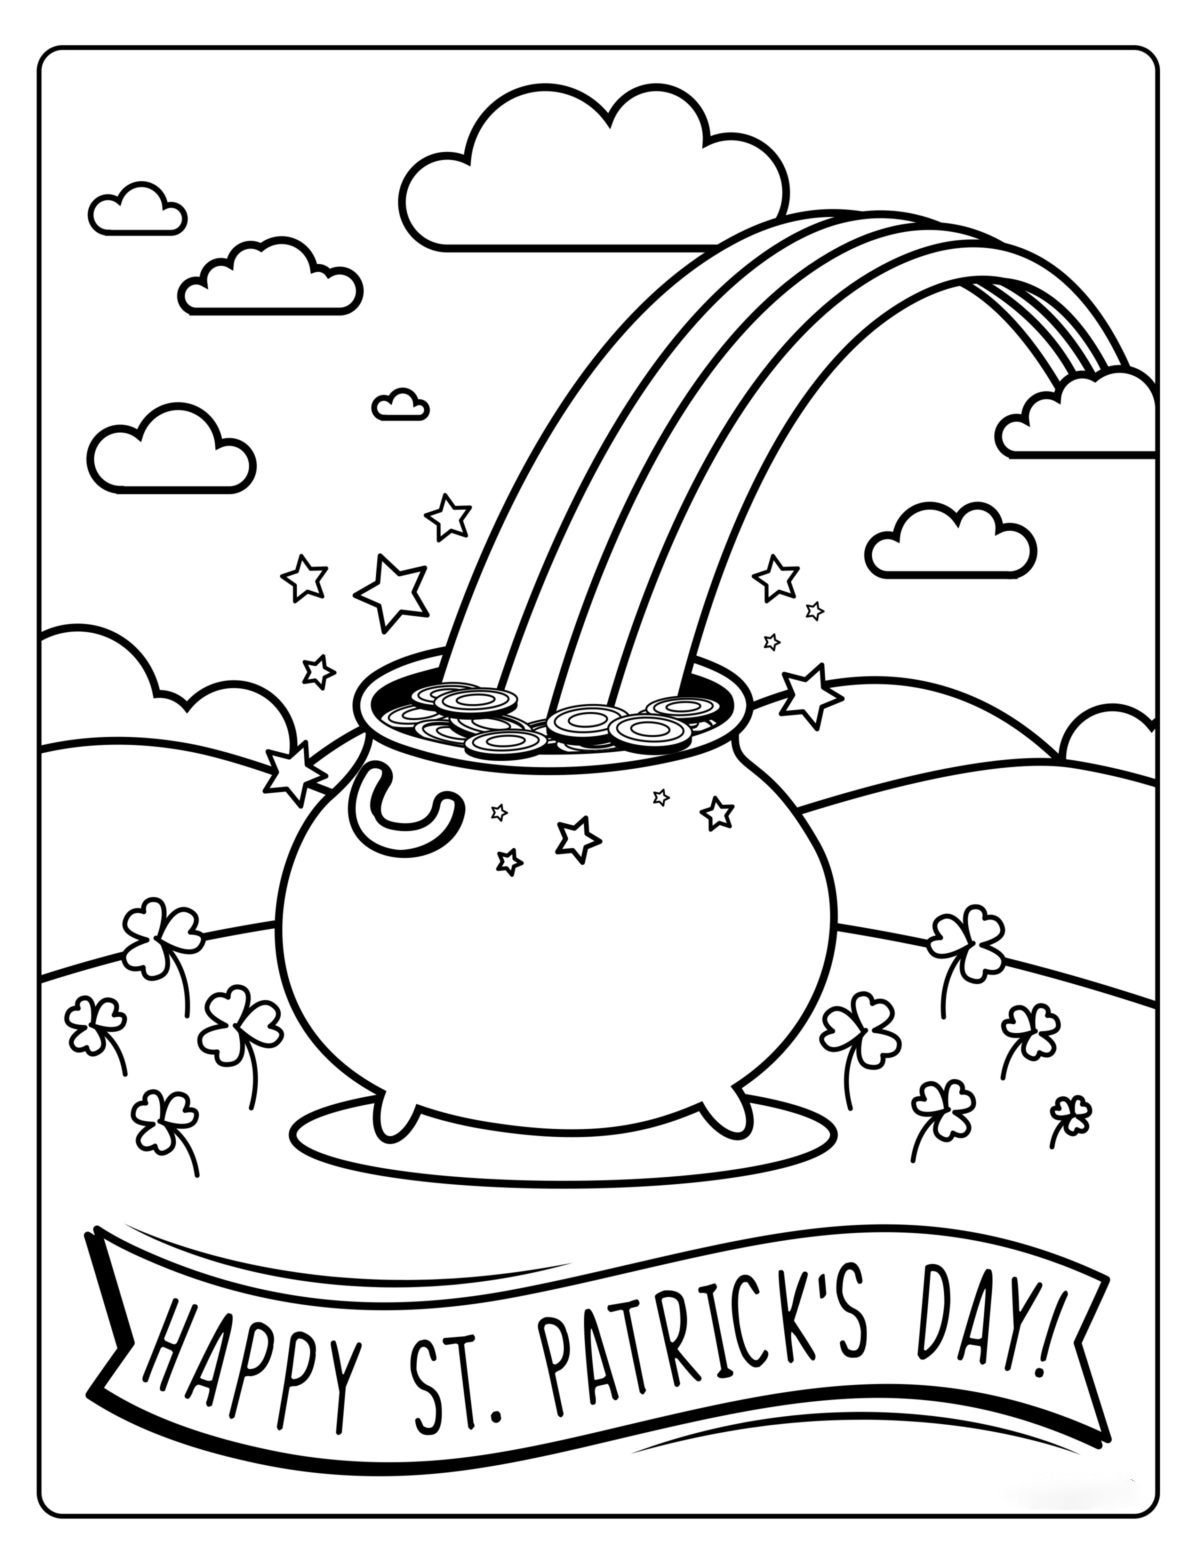 Rainbow St.Patricks Day Coloring Pages